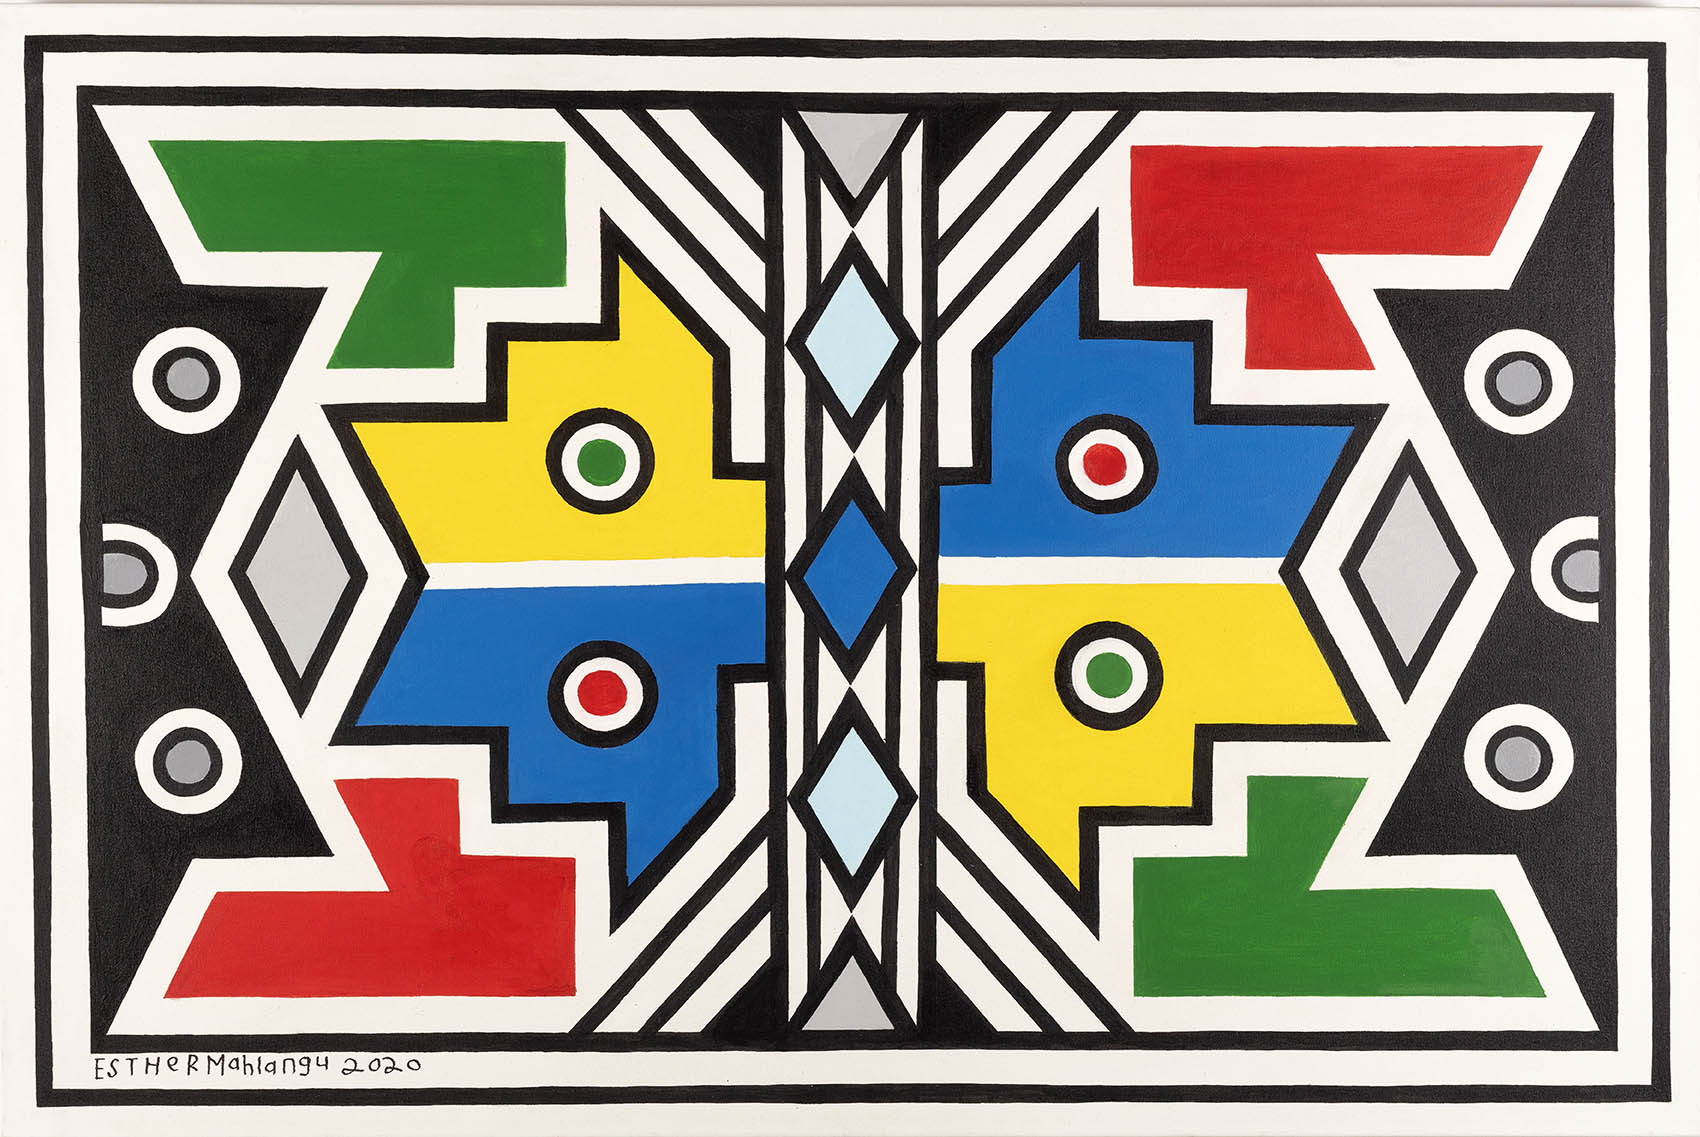 Then I Knew I Was Good at Painting: Esther Mahlangu, A Retrospective - (Ndebele Abstract 2020 | Acrylic on canvas | 100 x 150 cm)